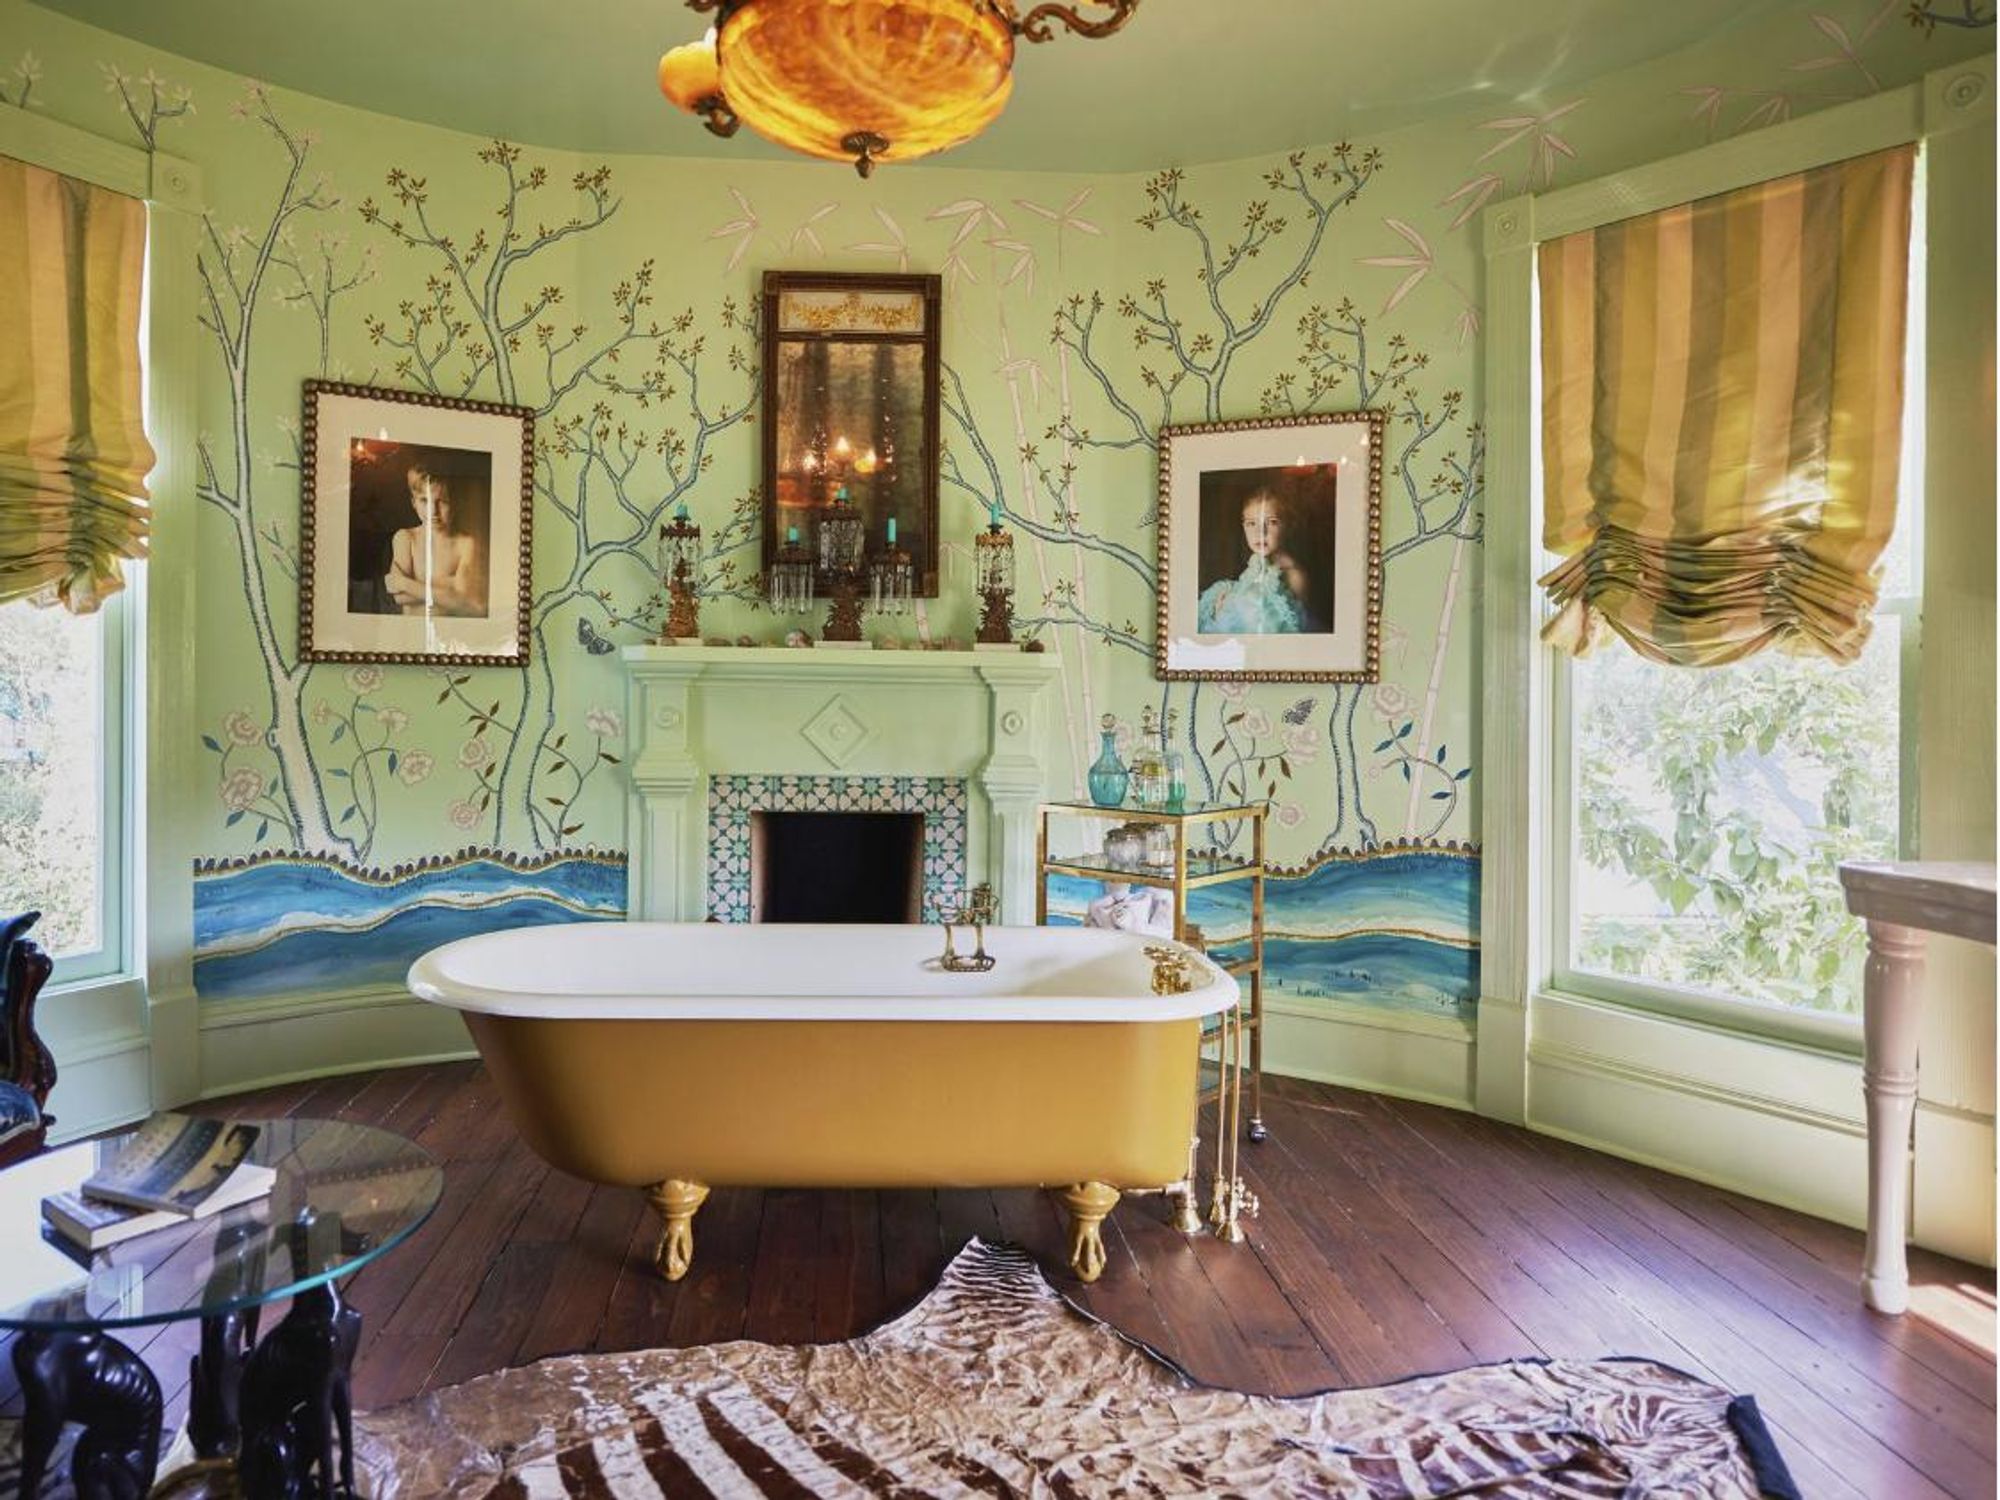 The bathroom of a Park Lane home featured in the Homes Tour.